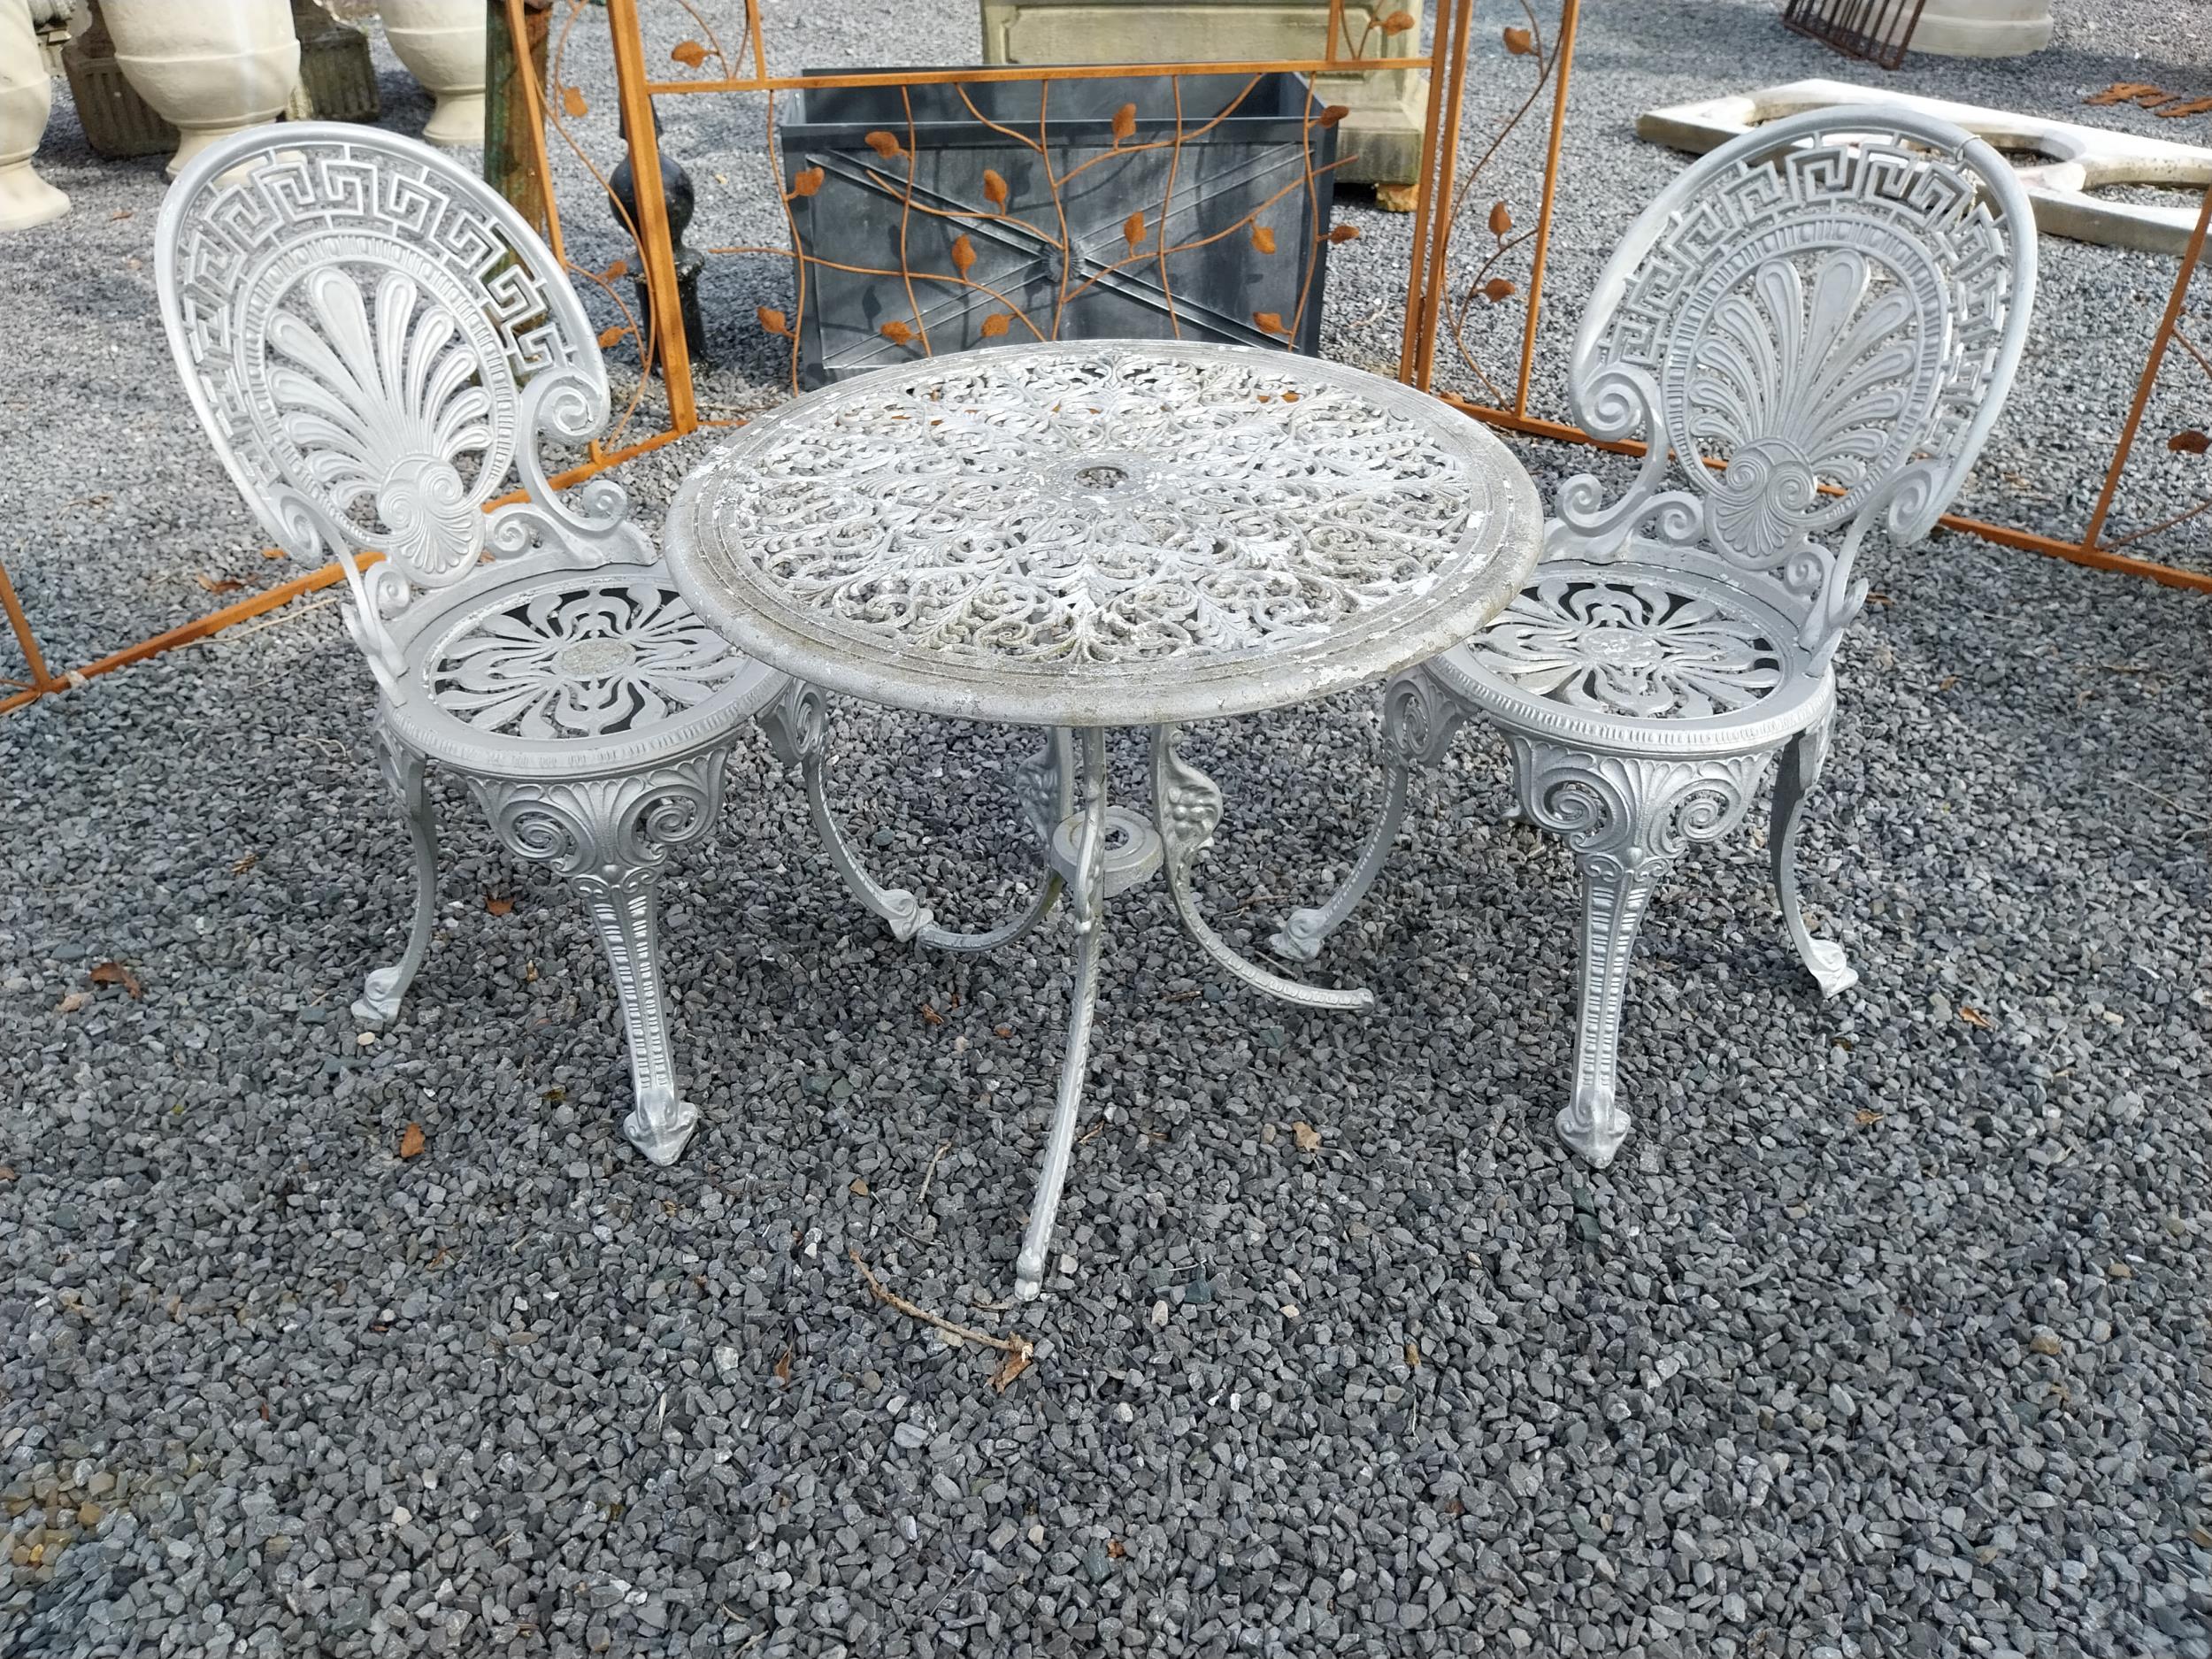 1950s cast aluminium garden table with two matching chairs {Tbl. 62 cm H x 68 cm Dia. and Chairs